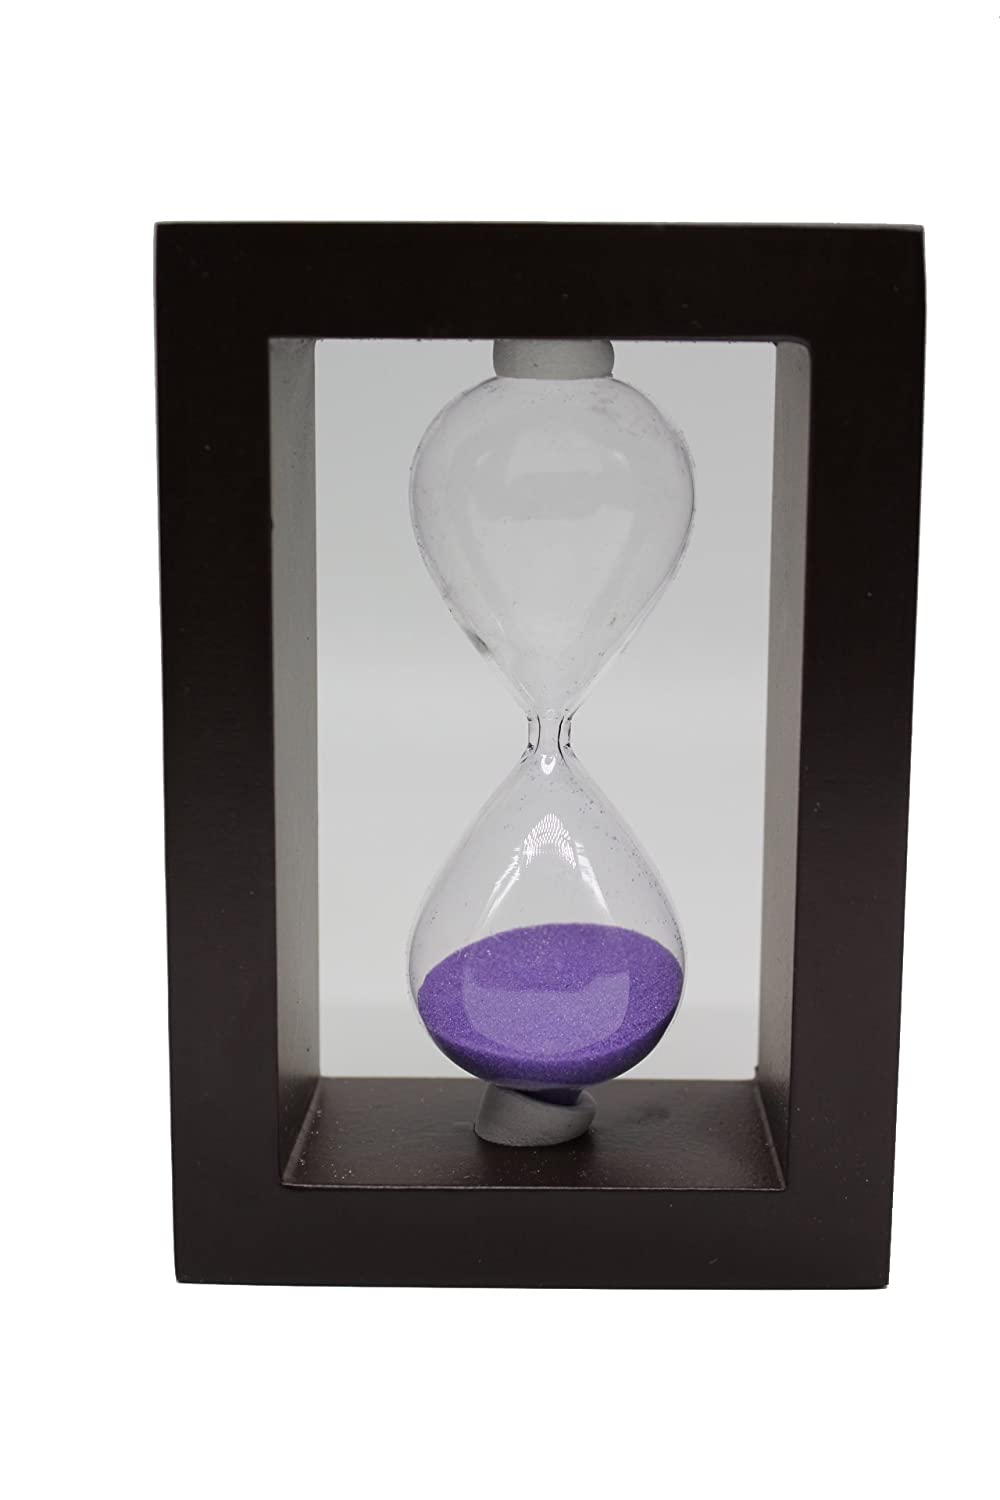 Hour Glass with Thick Wooden Body for Decor Item & Gift